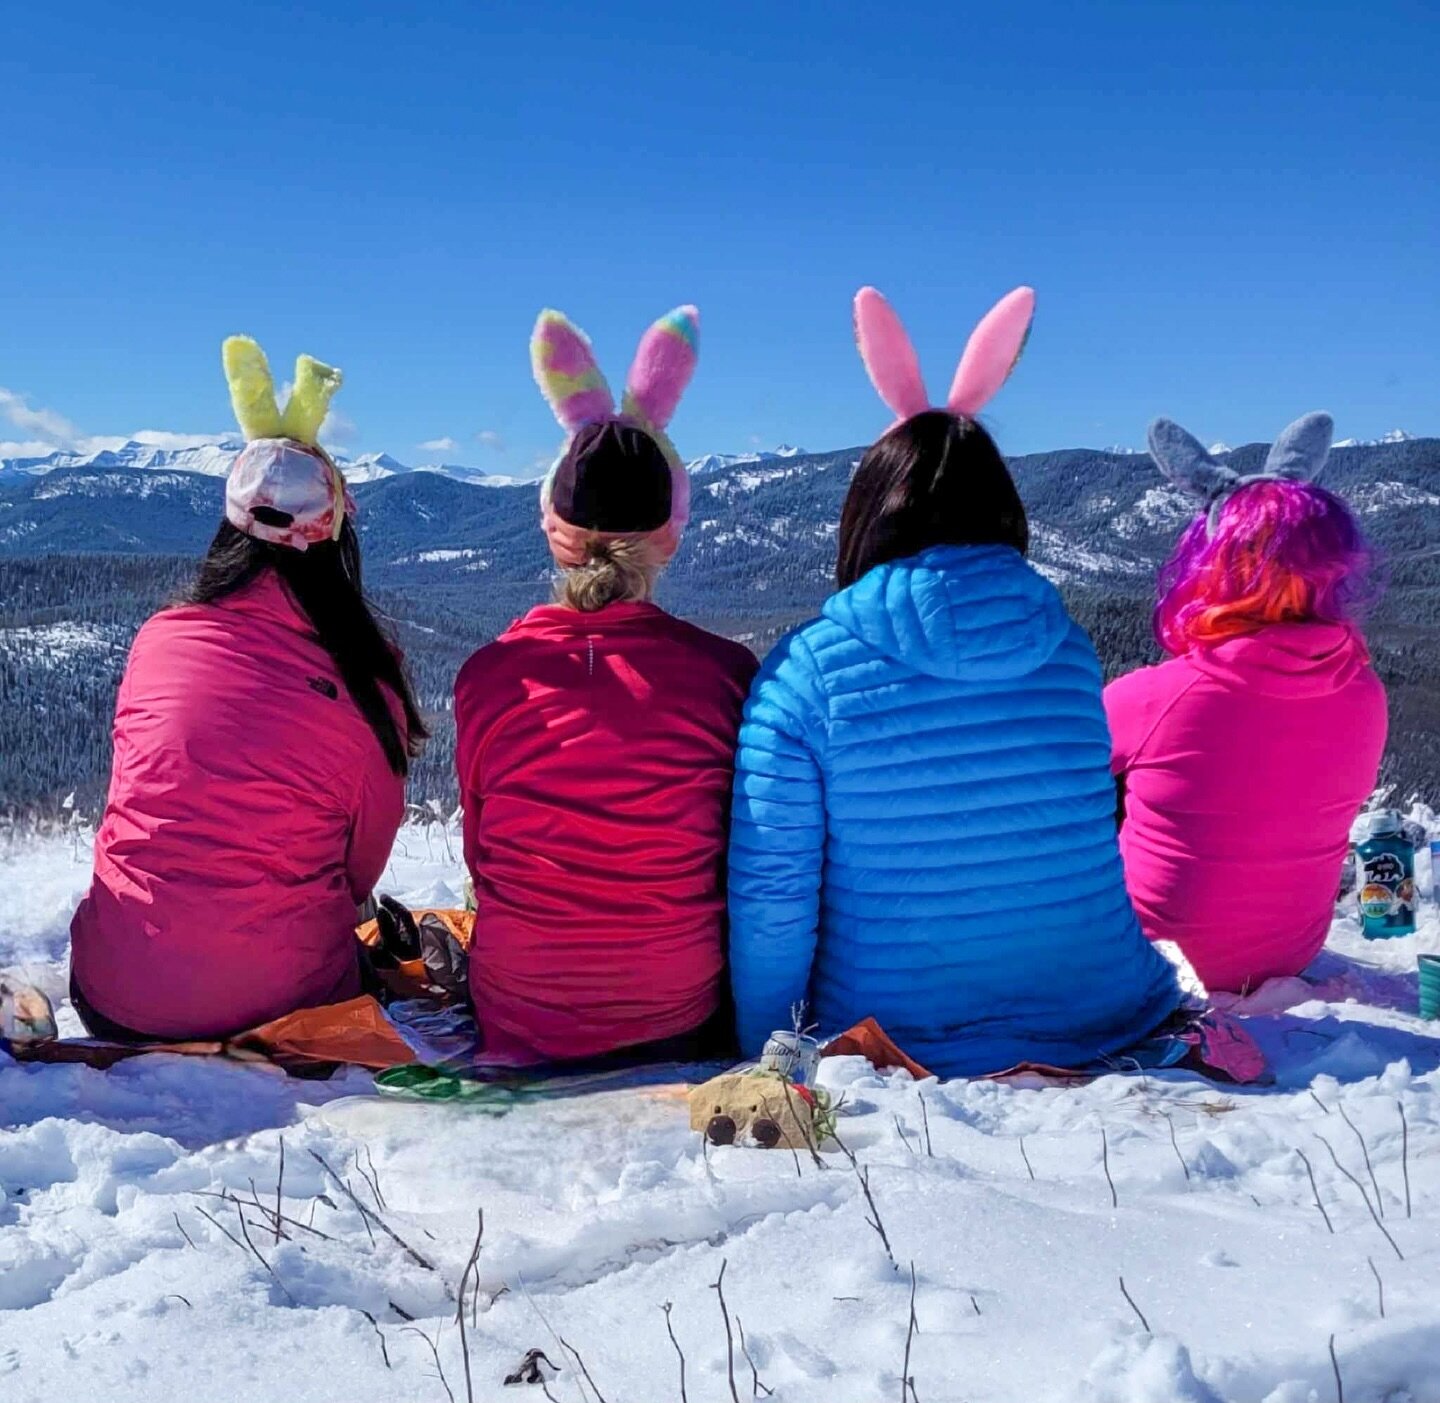 Happy Easter 🐰 We hope that every bunny has an egg-cellent day! Spring is upon us and we cannot wait to see more RadMums hitting the trails. Make sure to join the April 100km challenge if you need some movement motivation 😃 Details will be posted i